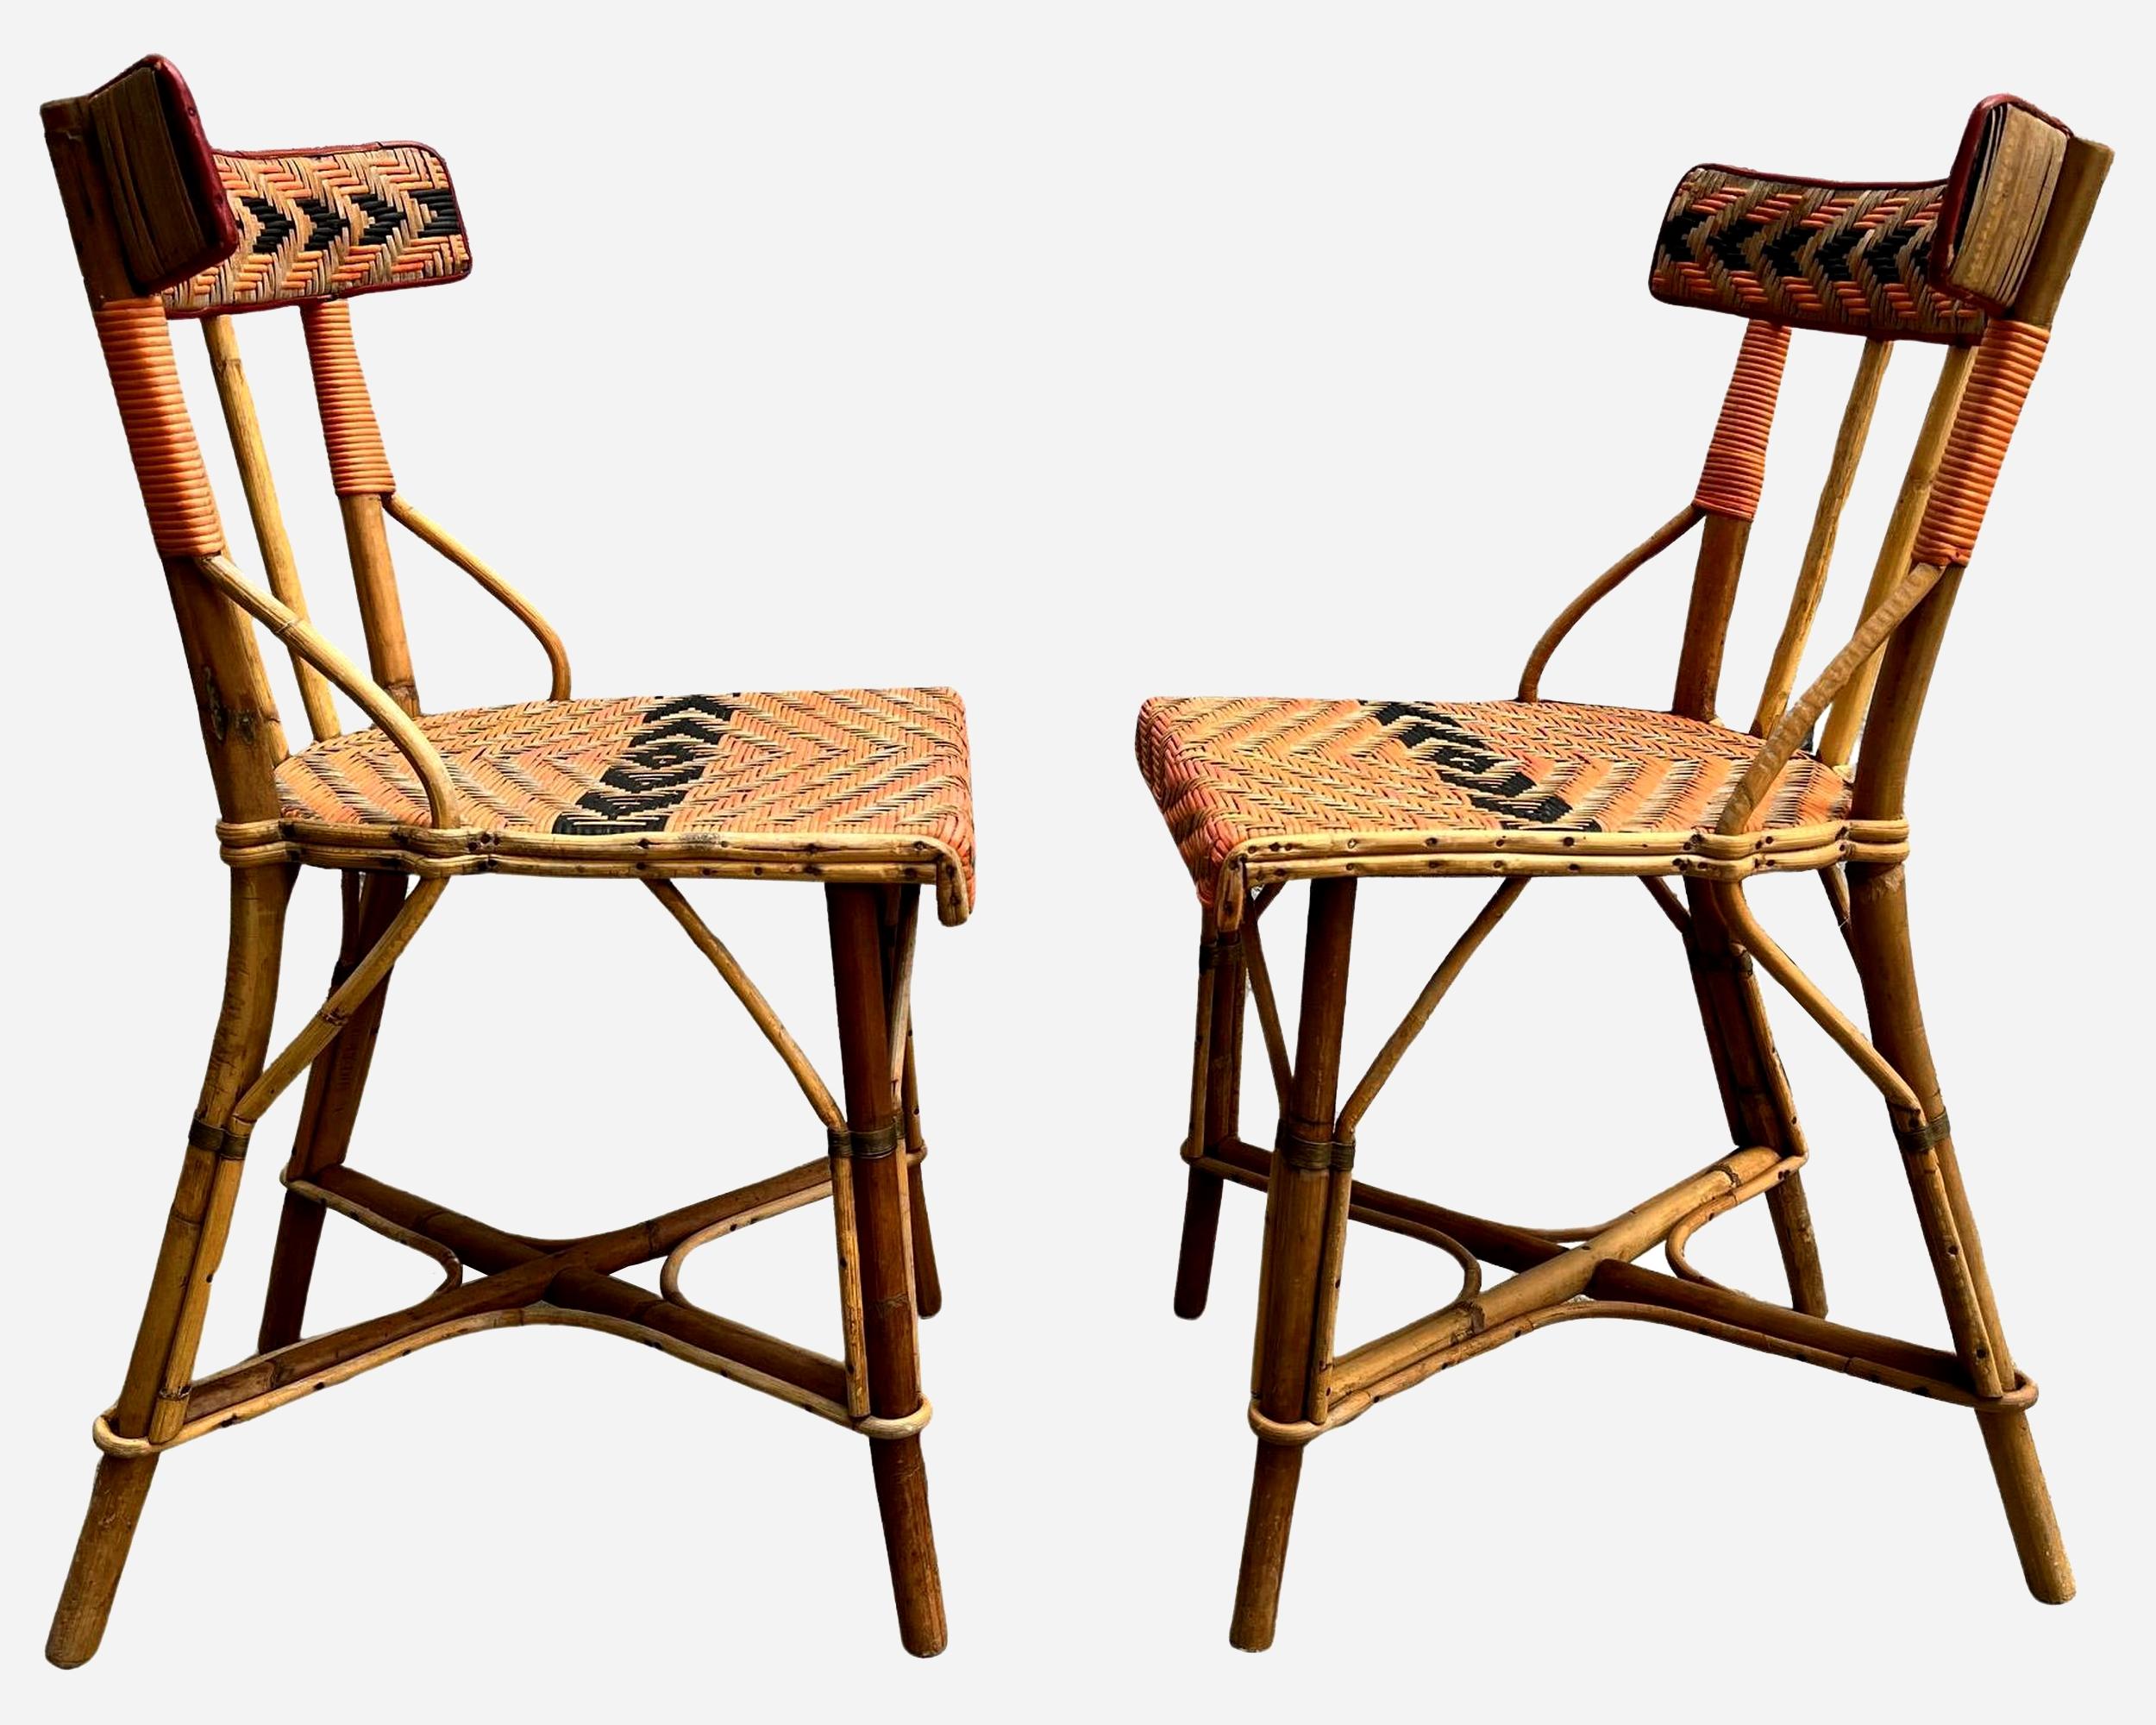 Attractive pair of chairs in natural, red and black woven  rattan . Bamboo structure.